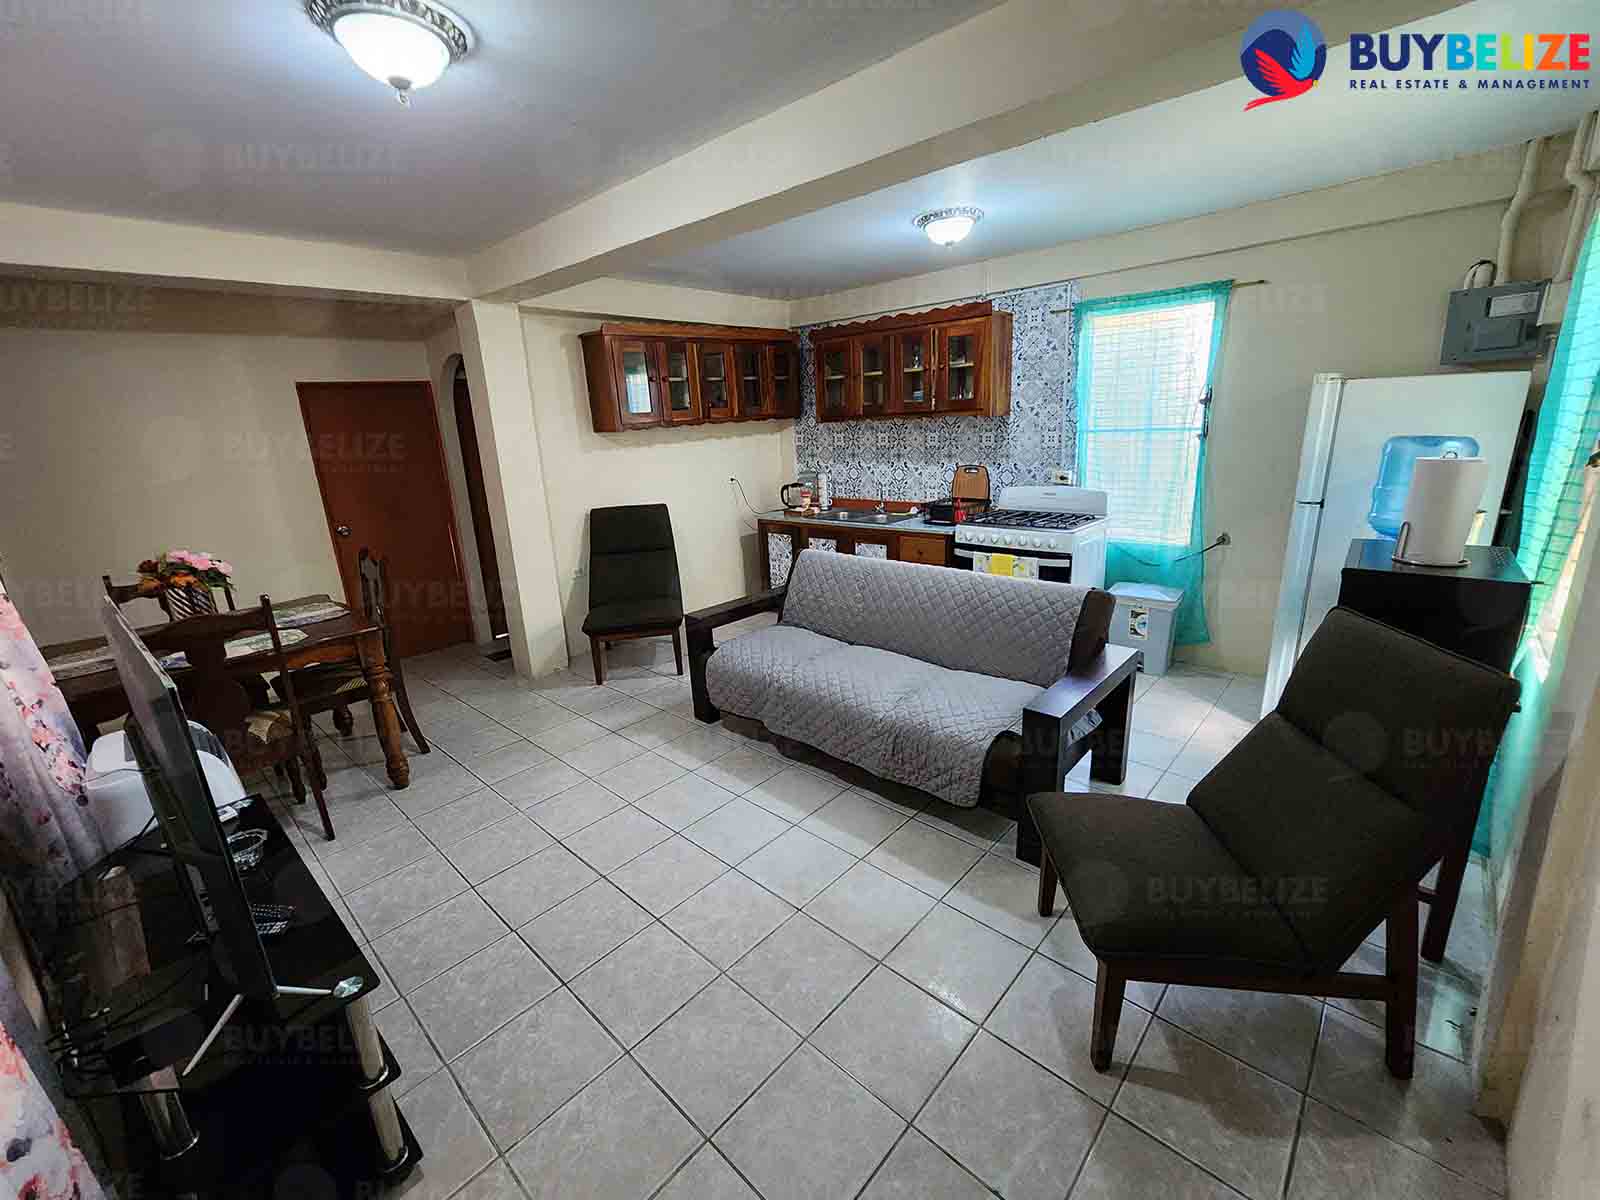 Furnished 2 Bed | 1 Bath Apartment for Rent in Belize City